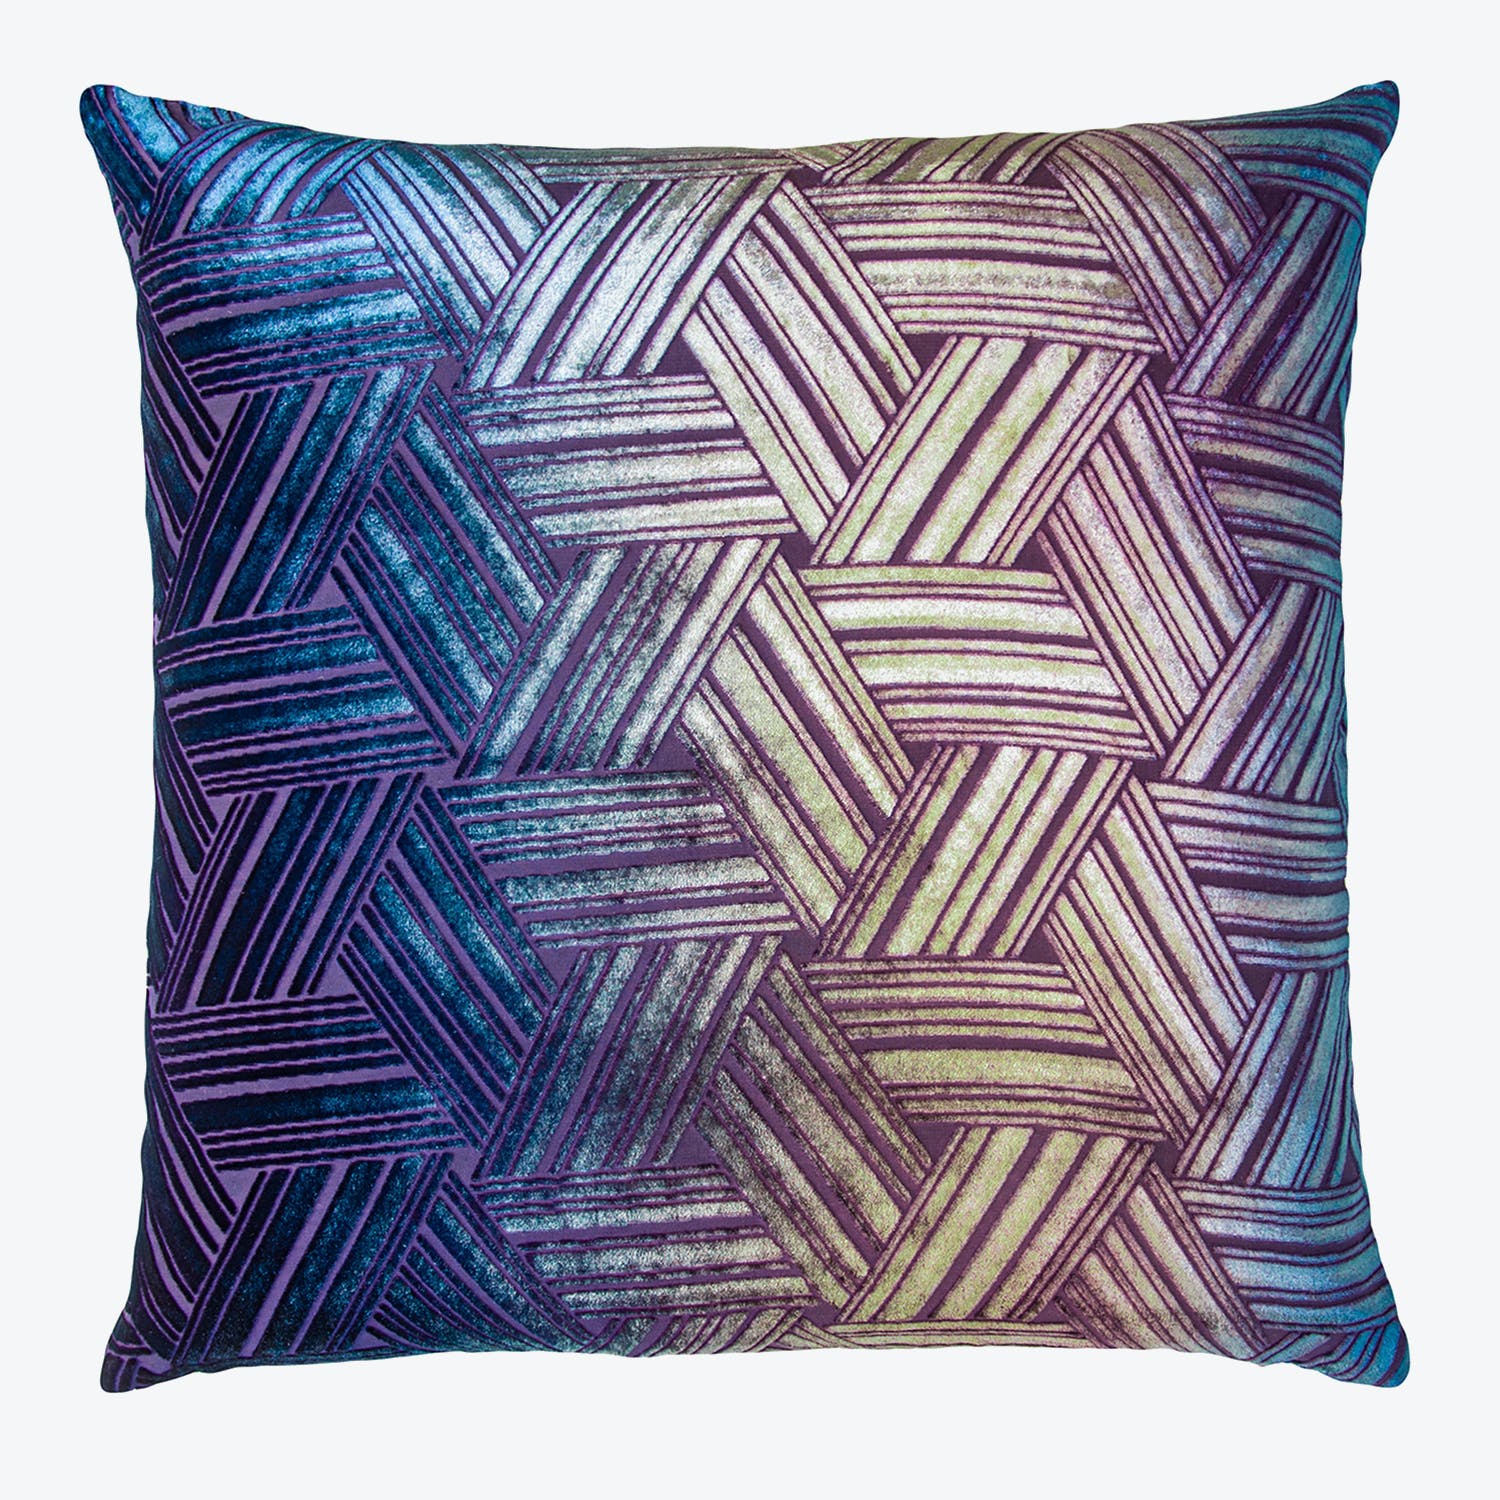 Vibrant herringbone patterned pillow adds color and texture to decor.